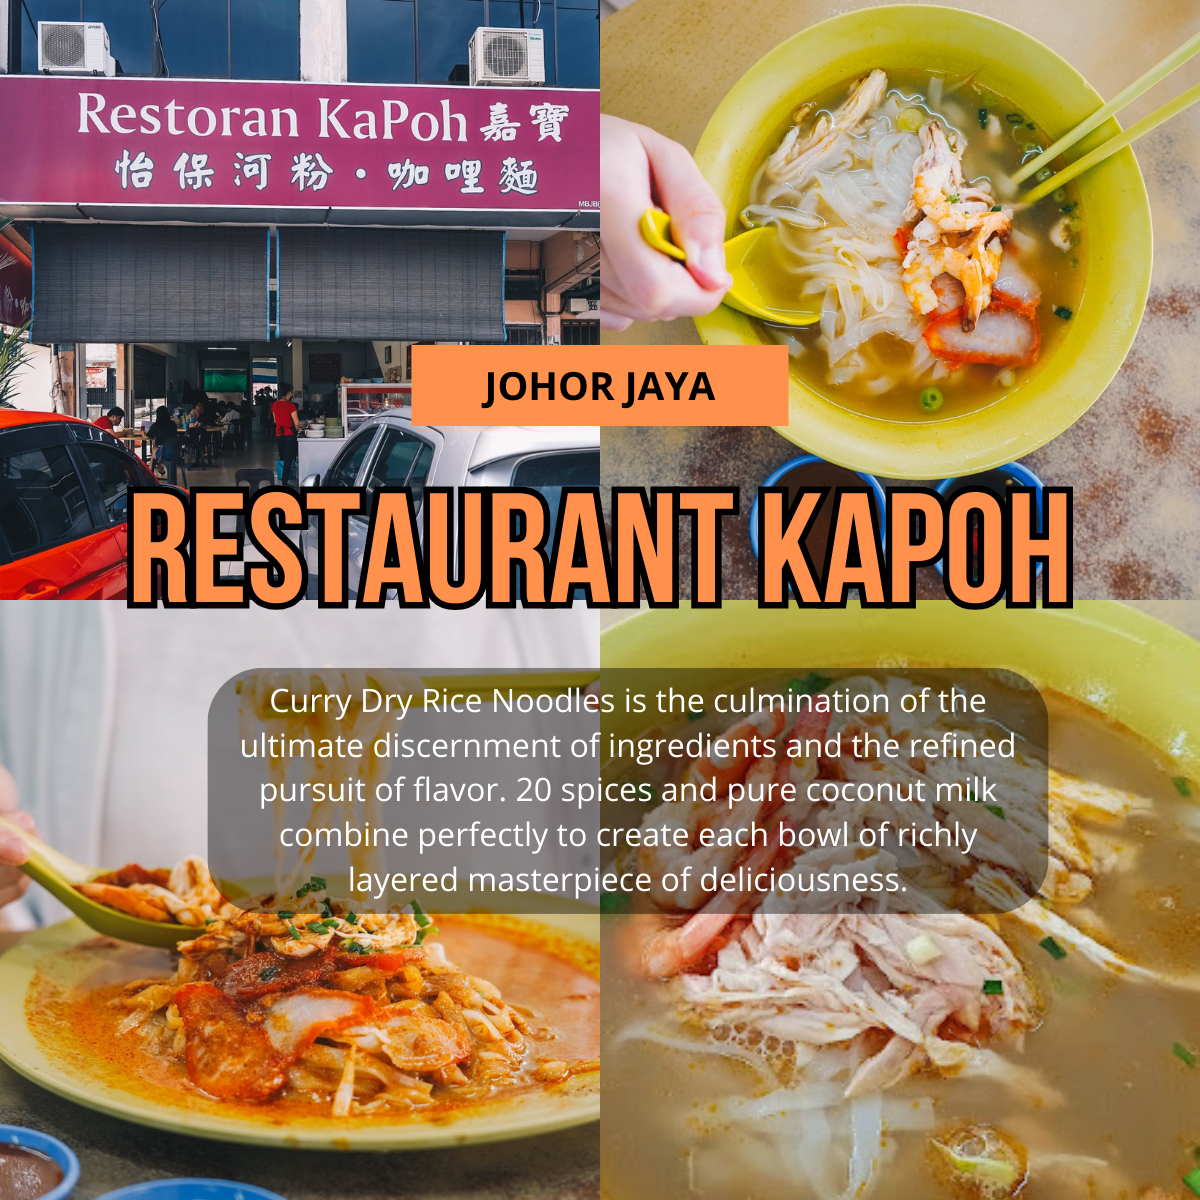 「 Restaurant Ka Poh 」: A Culinary Voyage to Ipoh in Johor Bahru